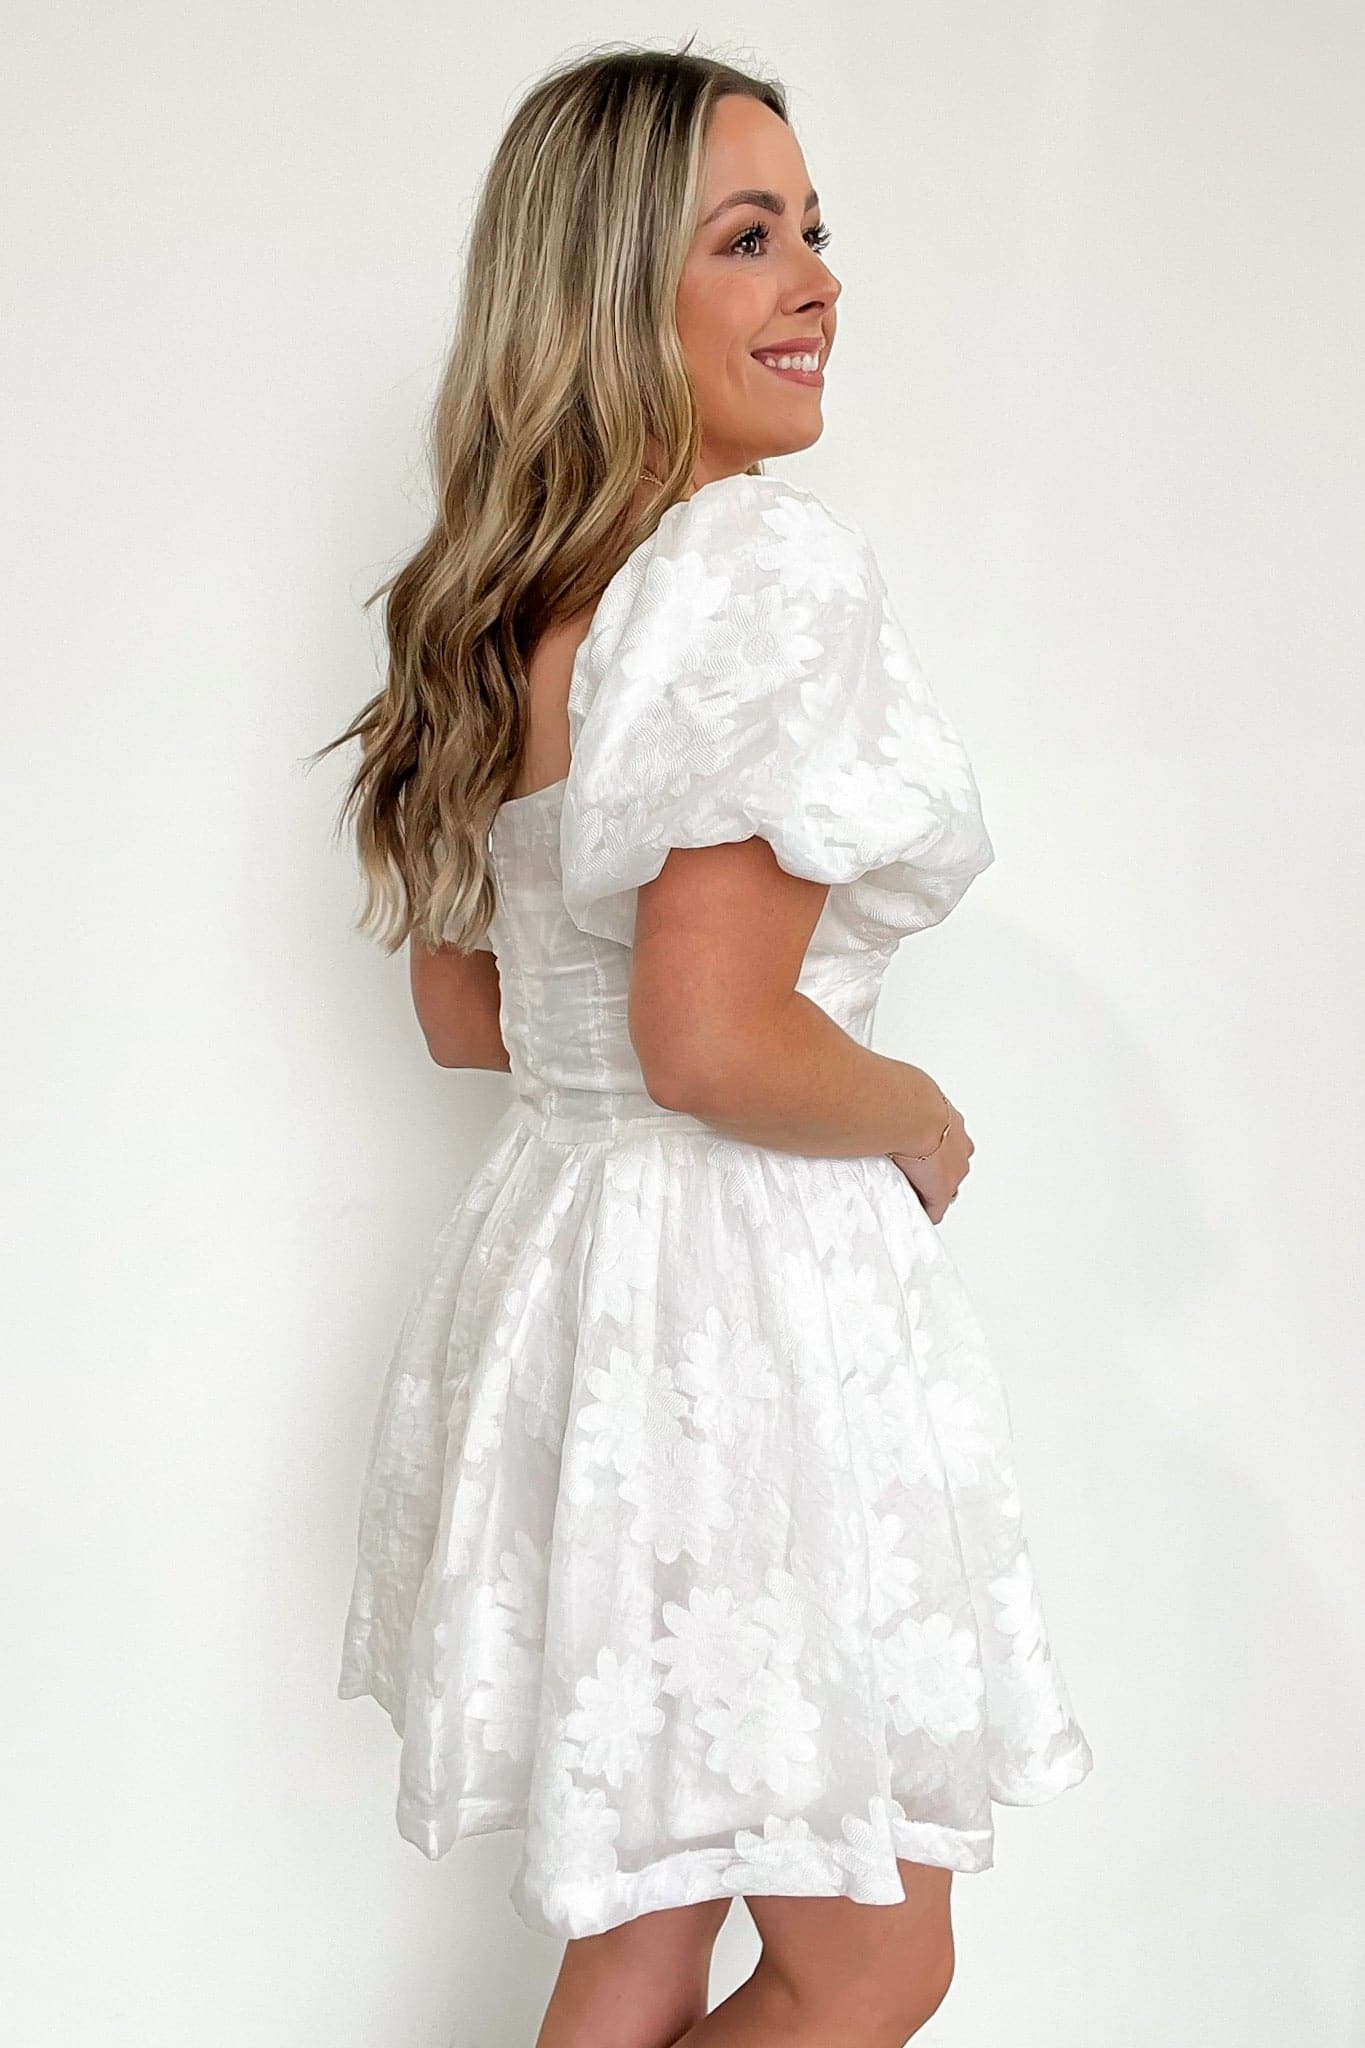  Unexpected Invite Puff Sleeve Jacquard Dress - FINAL SALE - Madison and Mallory